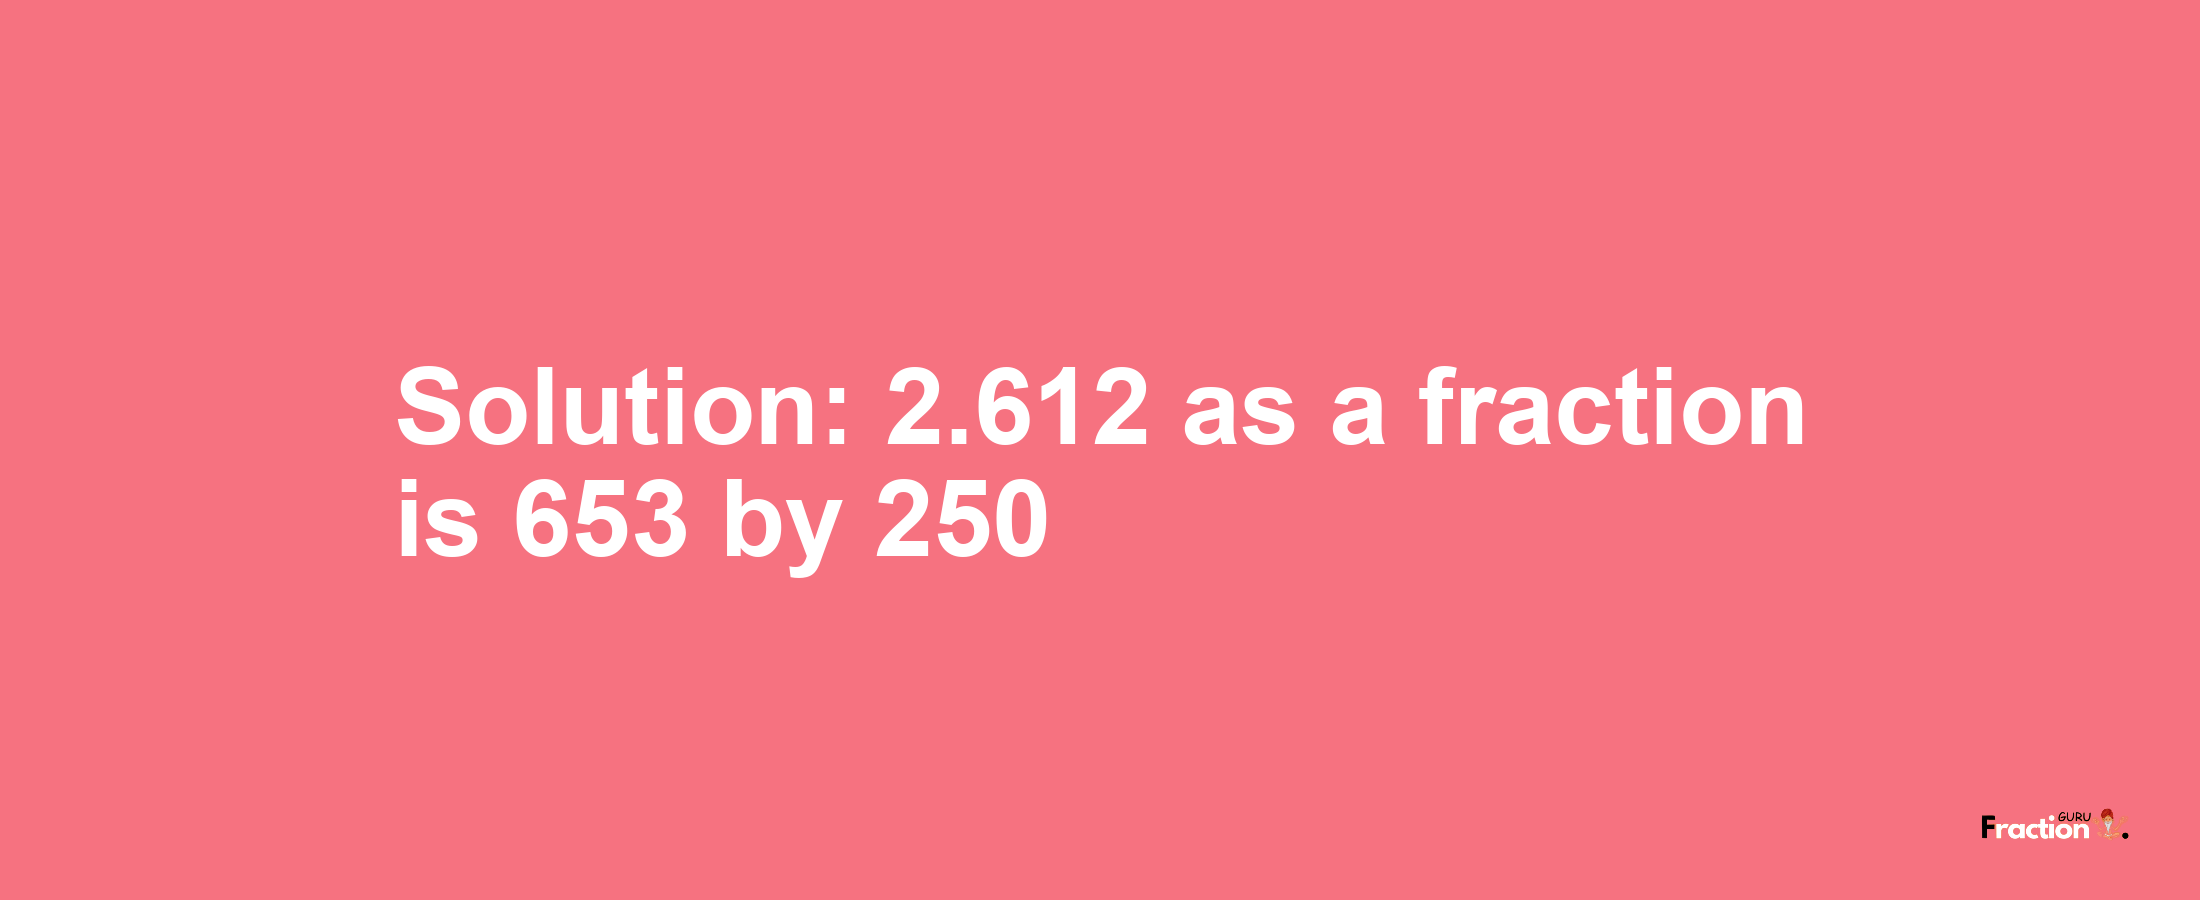 Solution:2.612 as a fraction is 653/250